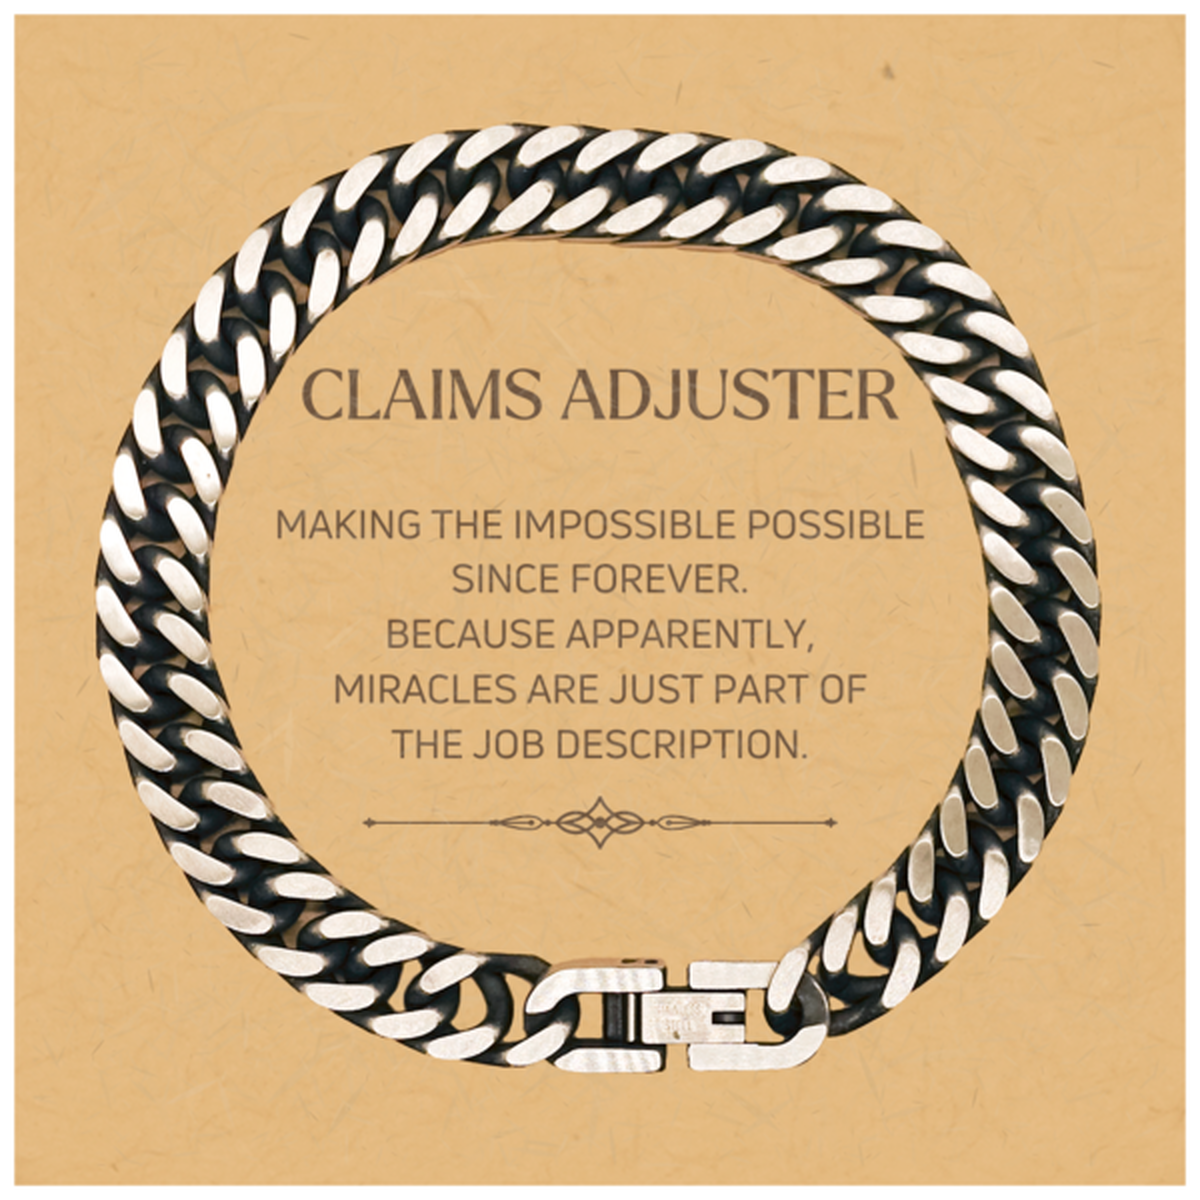 Funny Claims Adjuster Gifts, Miracles are just part of the job description, Inspirational Birthday Christmas Cuban Link Chain Bracelet For Claims Adjuster, Men, Women, Coworkers, Friends, Boss